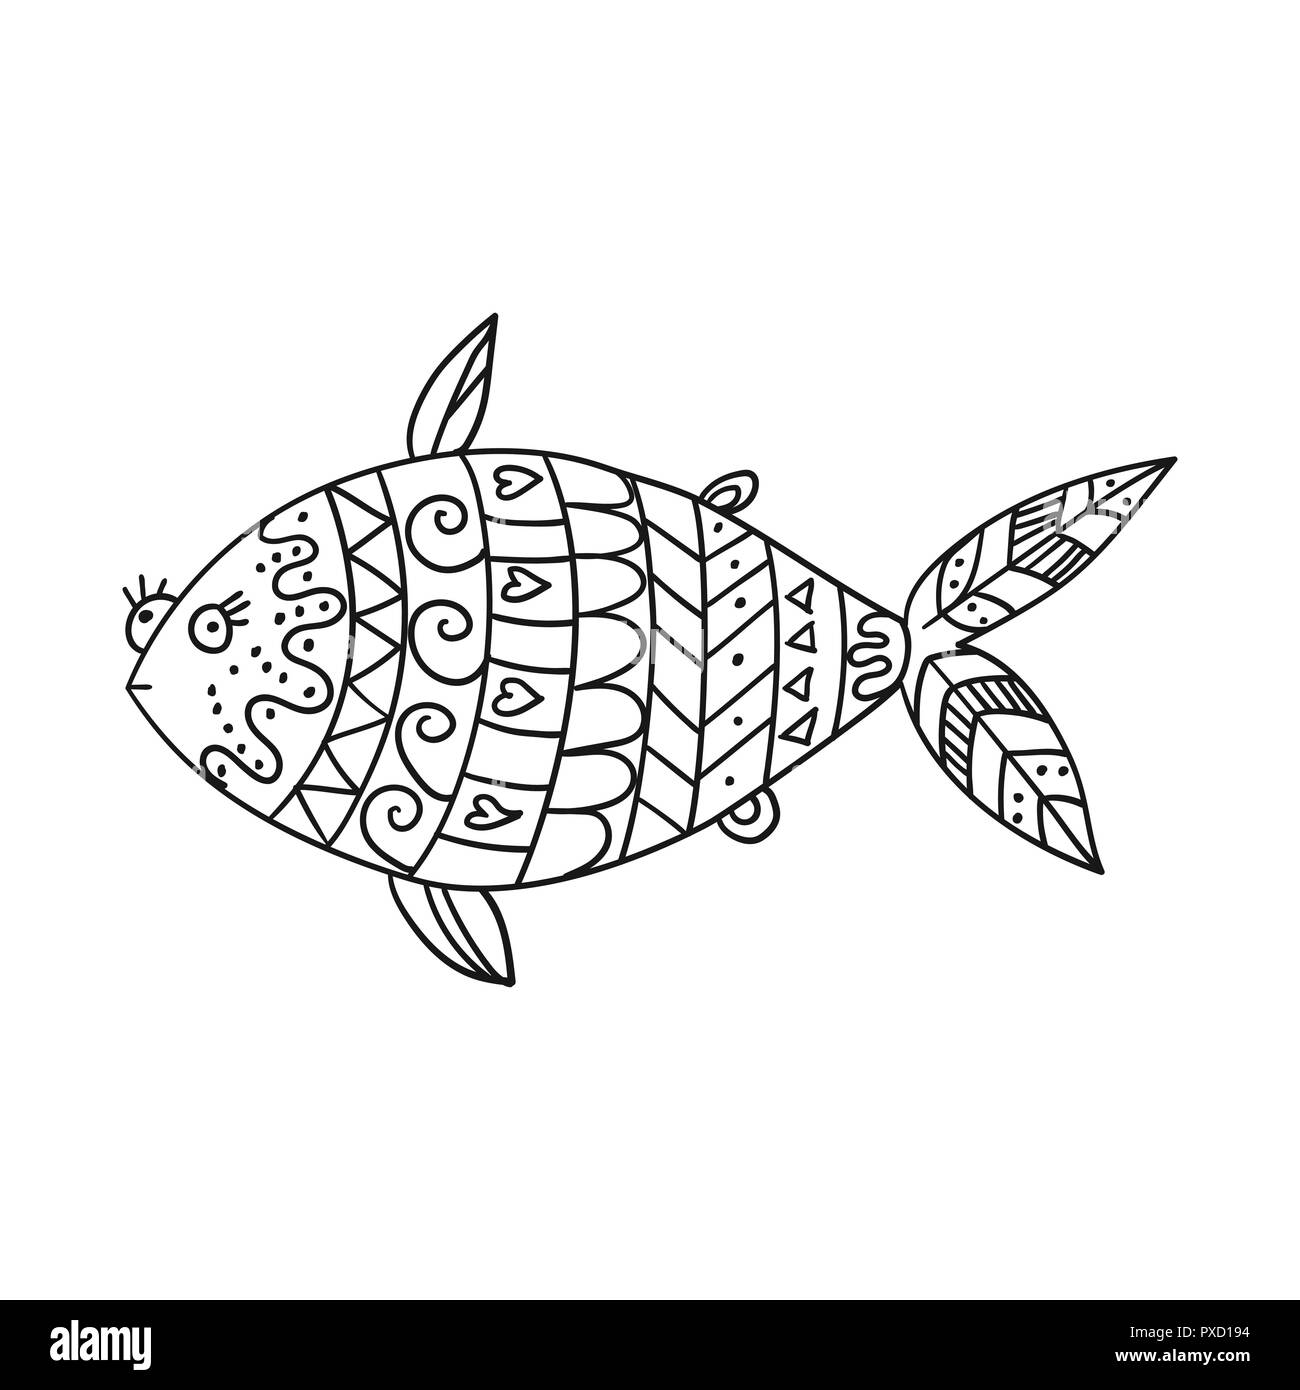 Stylized fish isolated on white background. Freehand ornamental fish for children coloring book. Stock Vector